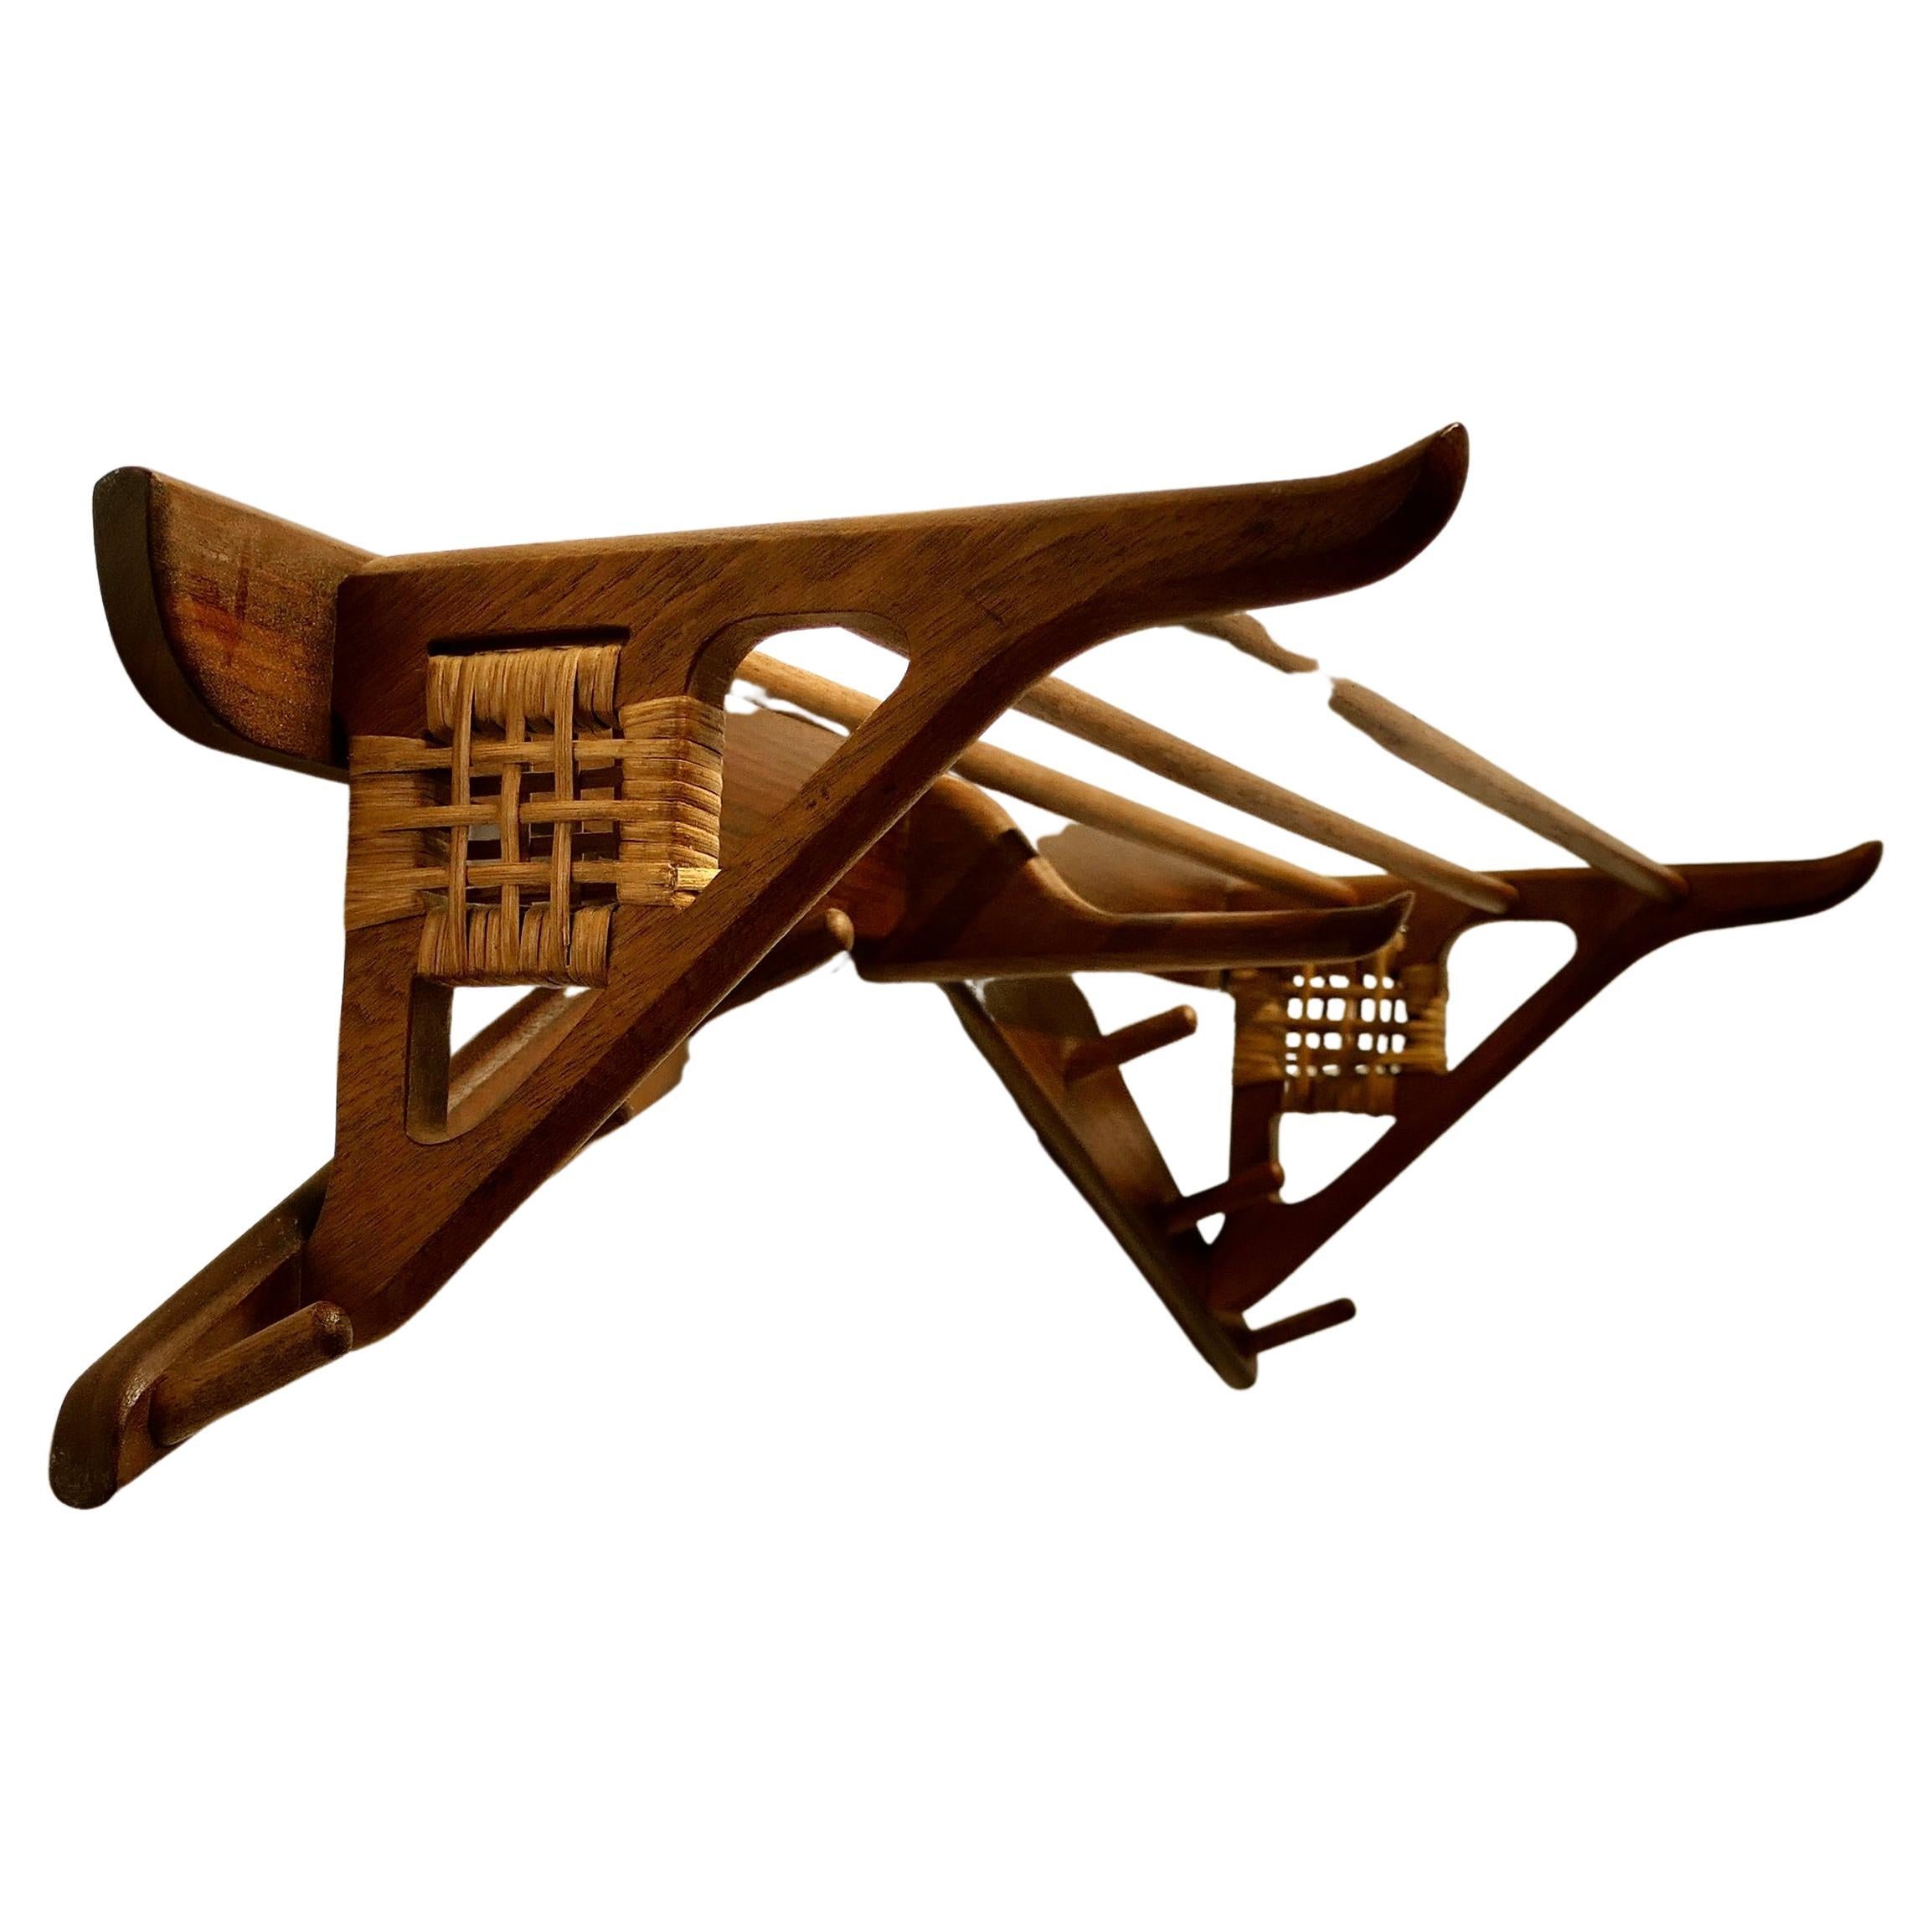 Midcentury Danish Design Solid Teak Hall Rack Coat Hanger


A very stylish Scandinavian Danish Design 60s Retro shelved coat and hat rack 
In very good condition, the rack has 6 short hooks and a along one in the centre beneath the shelf and it has